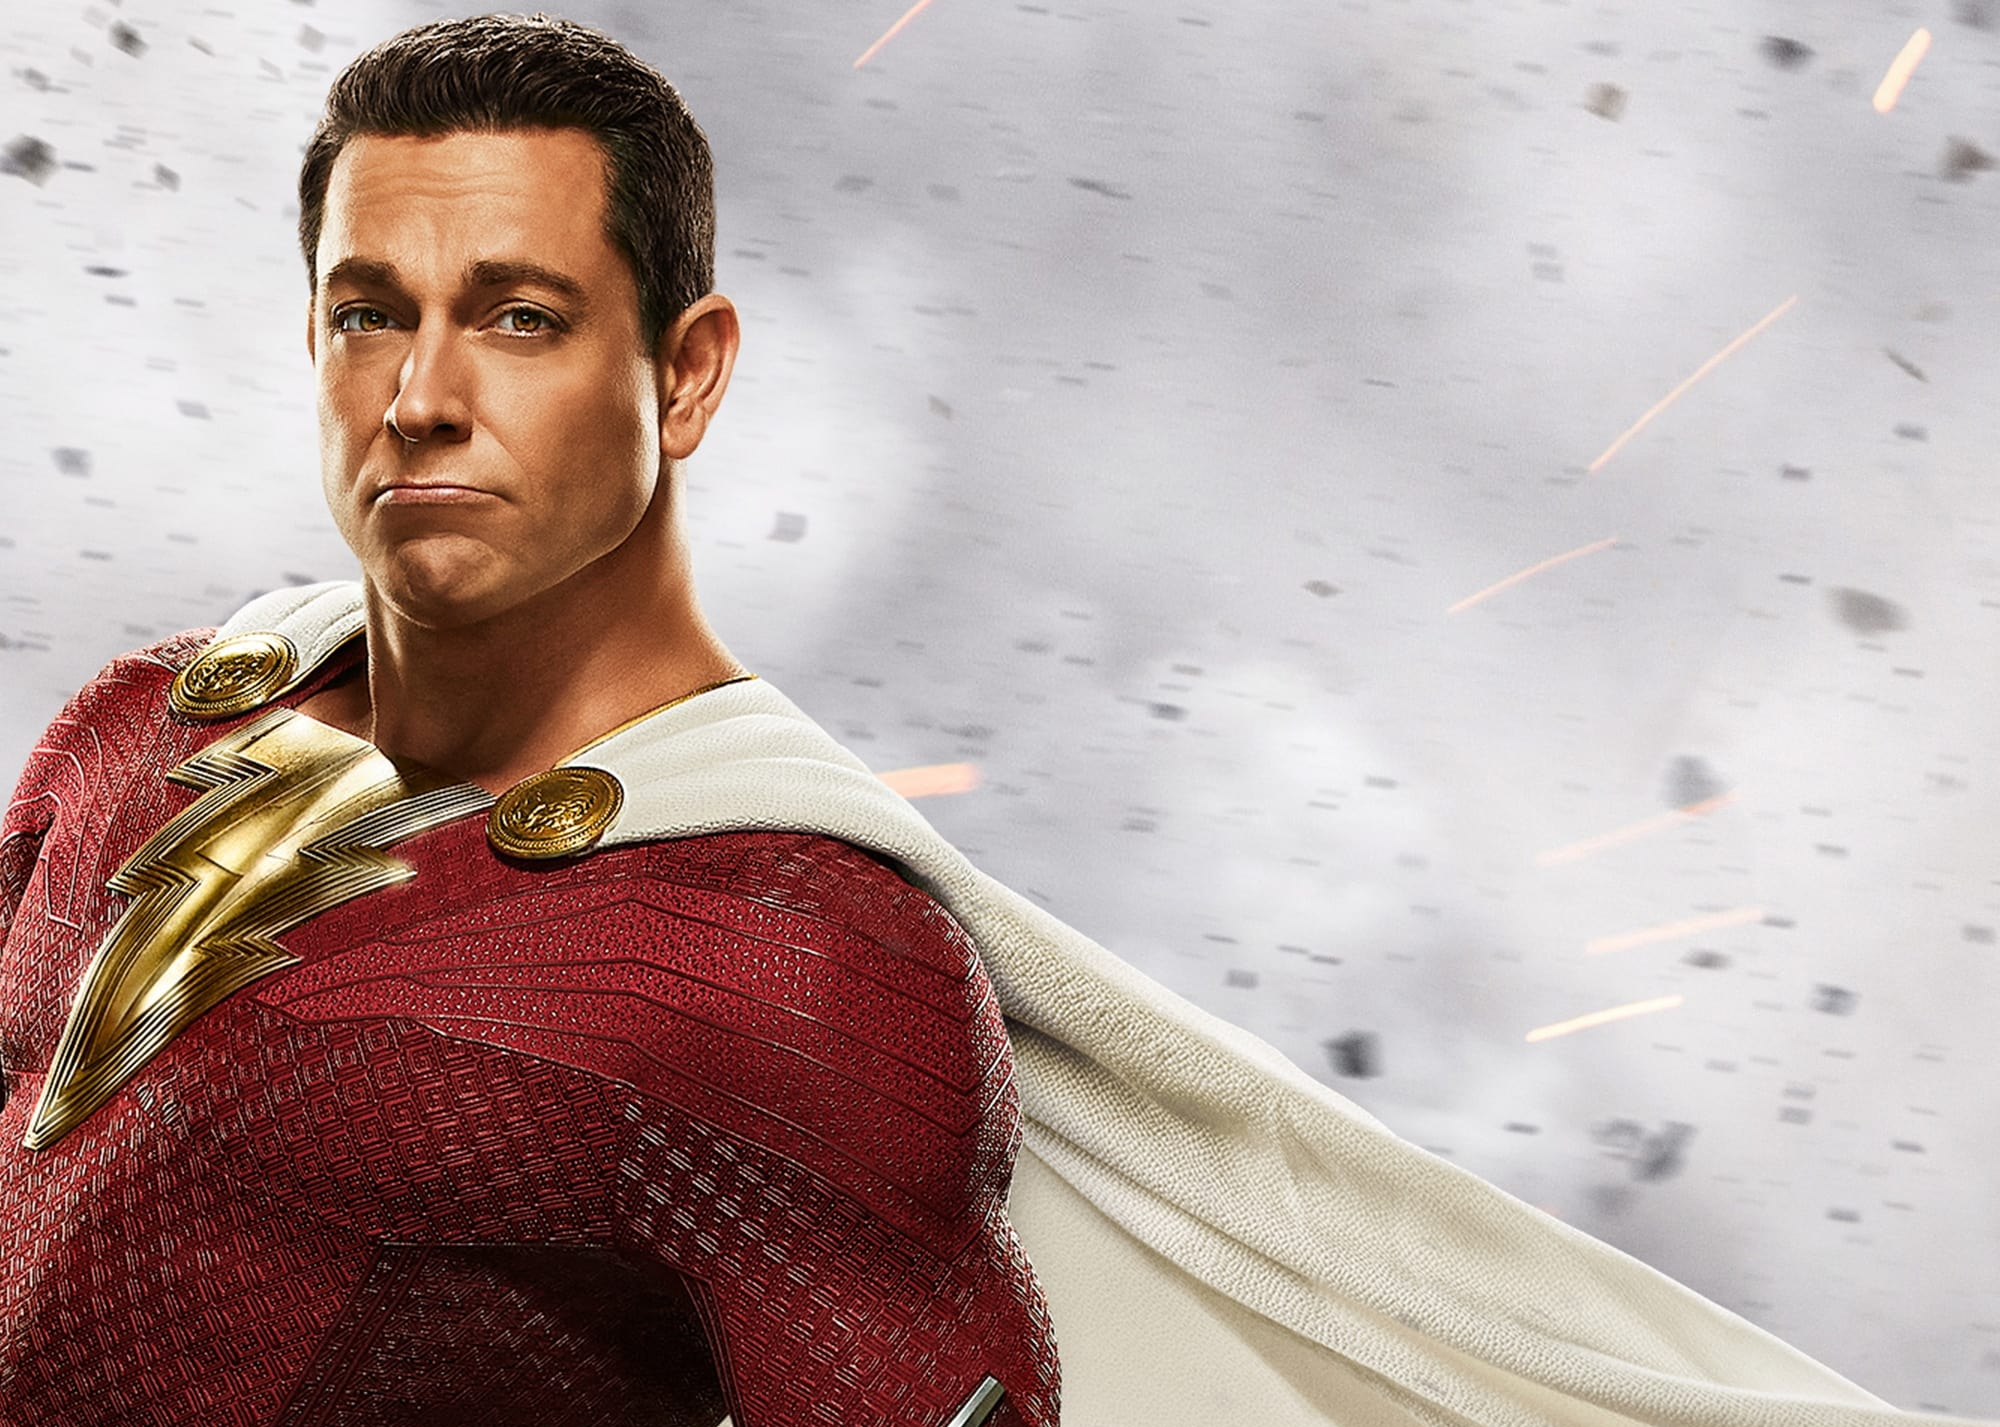 Shazam Fury of the Gods Streaming Release Date: Is It Coming to